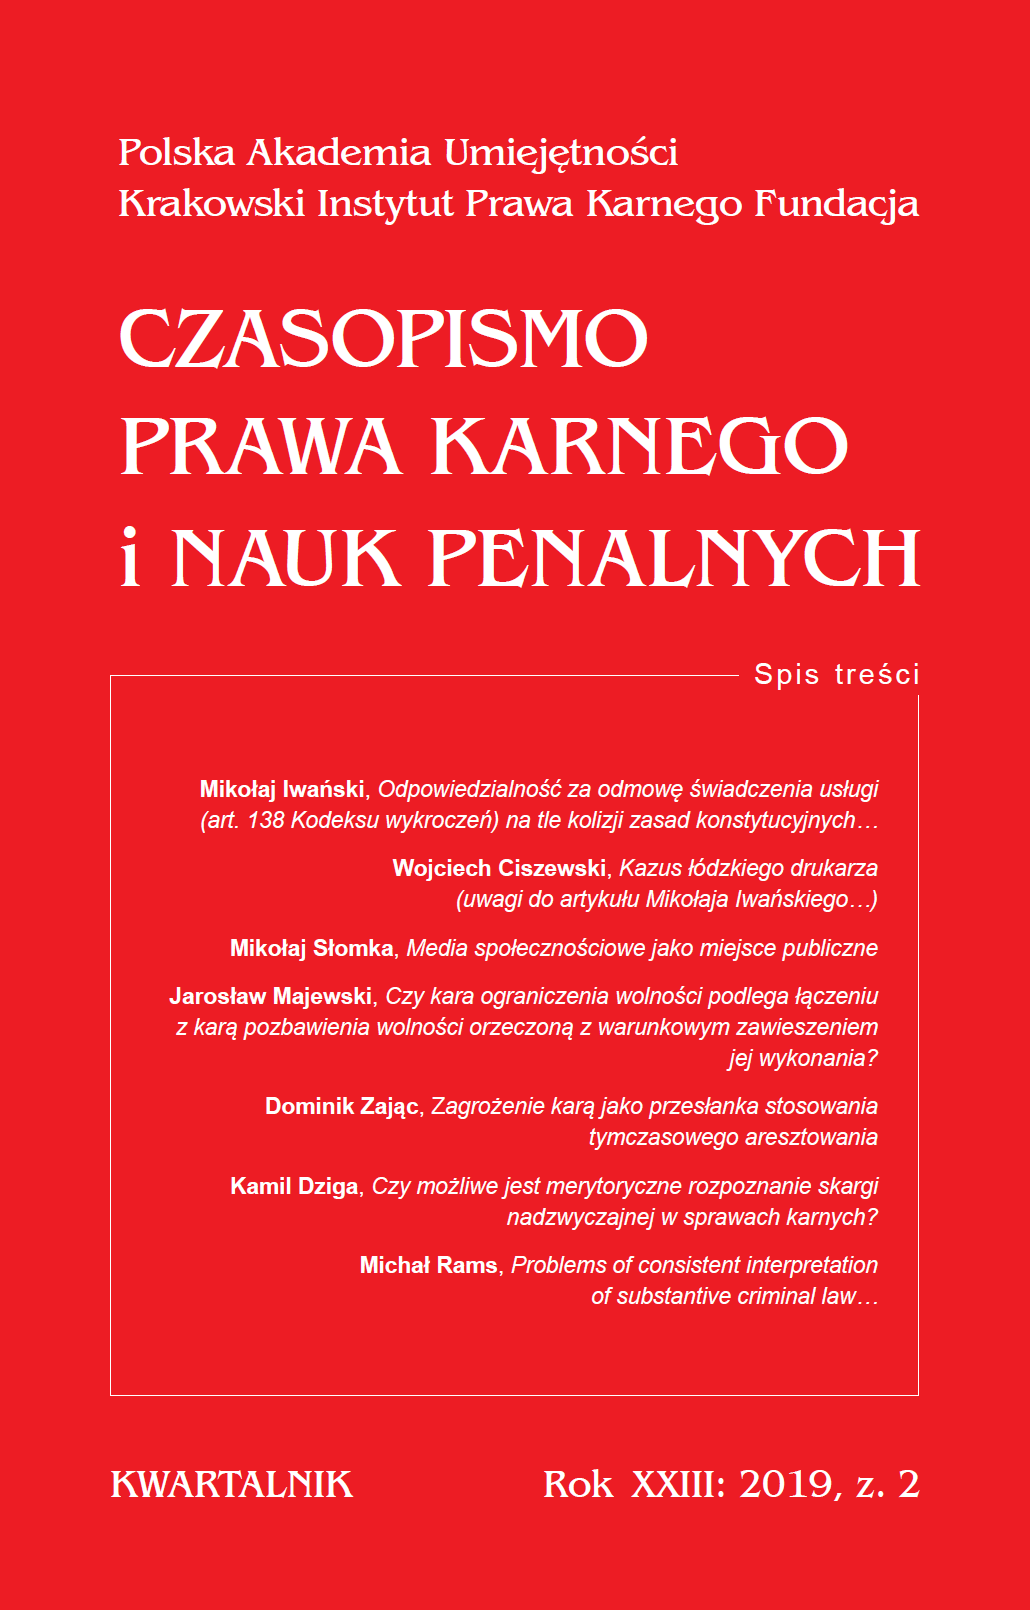 Liability for refusal of service (Article 138 of the Polish Code of Contraventions) in the perspective of collision of constitutional principles. Cover Image